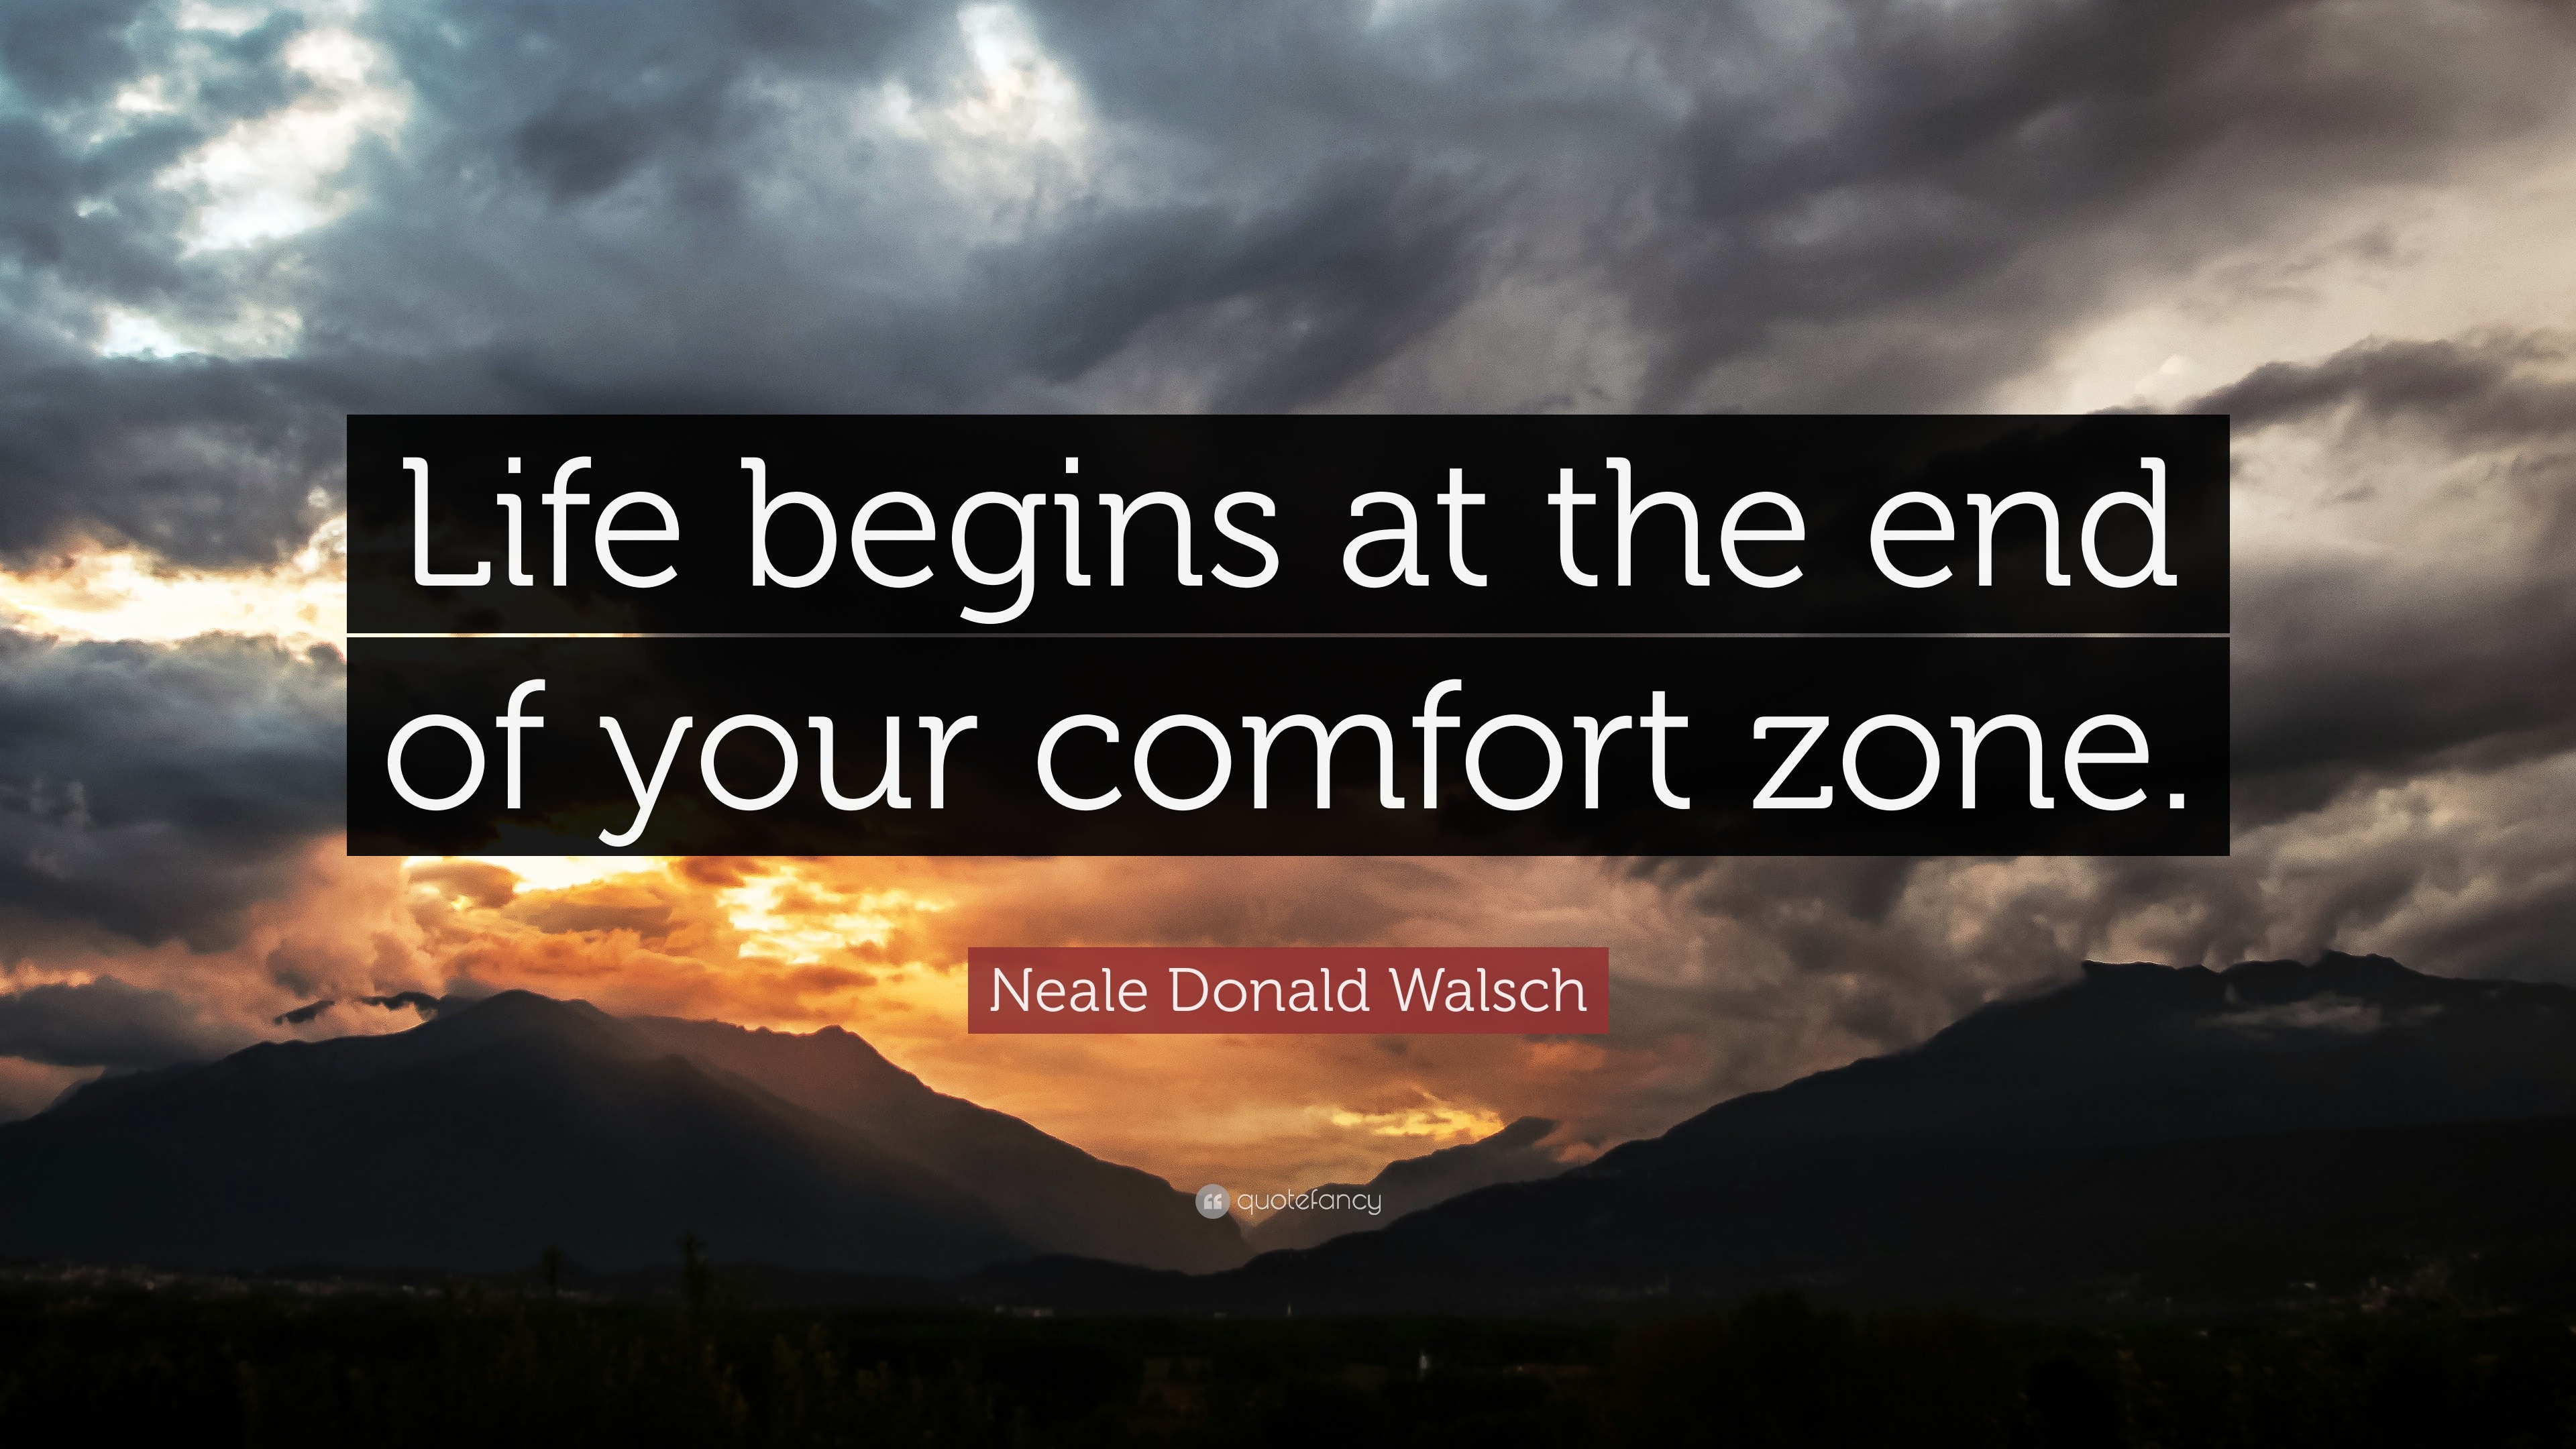 Neale Donald Walsch Quote: “Life begins at the end of your comfort zone.”